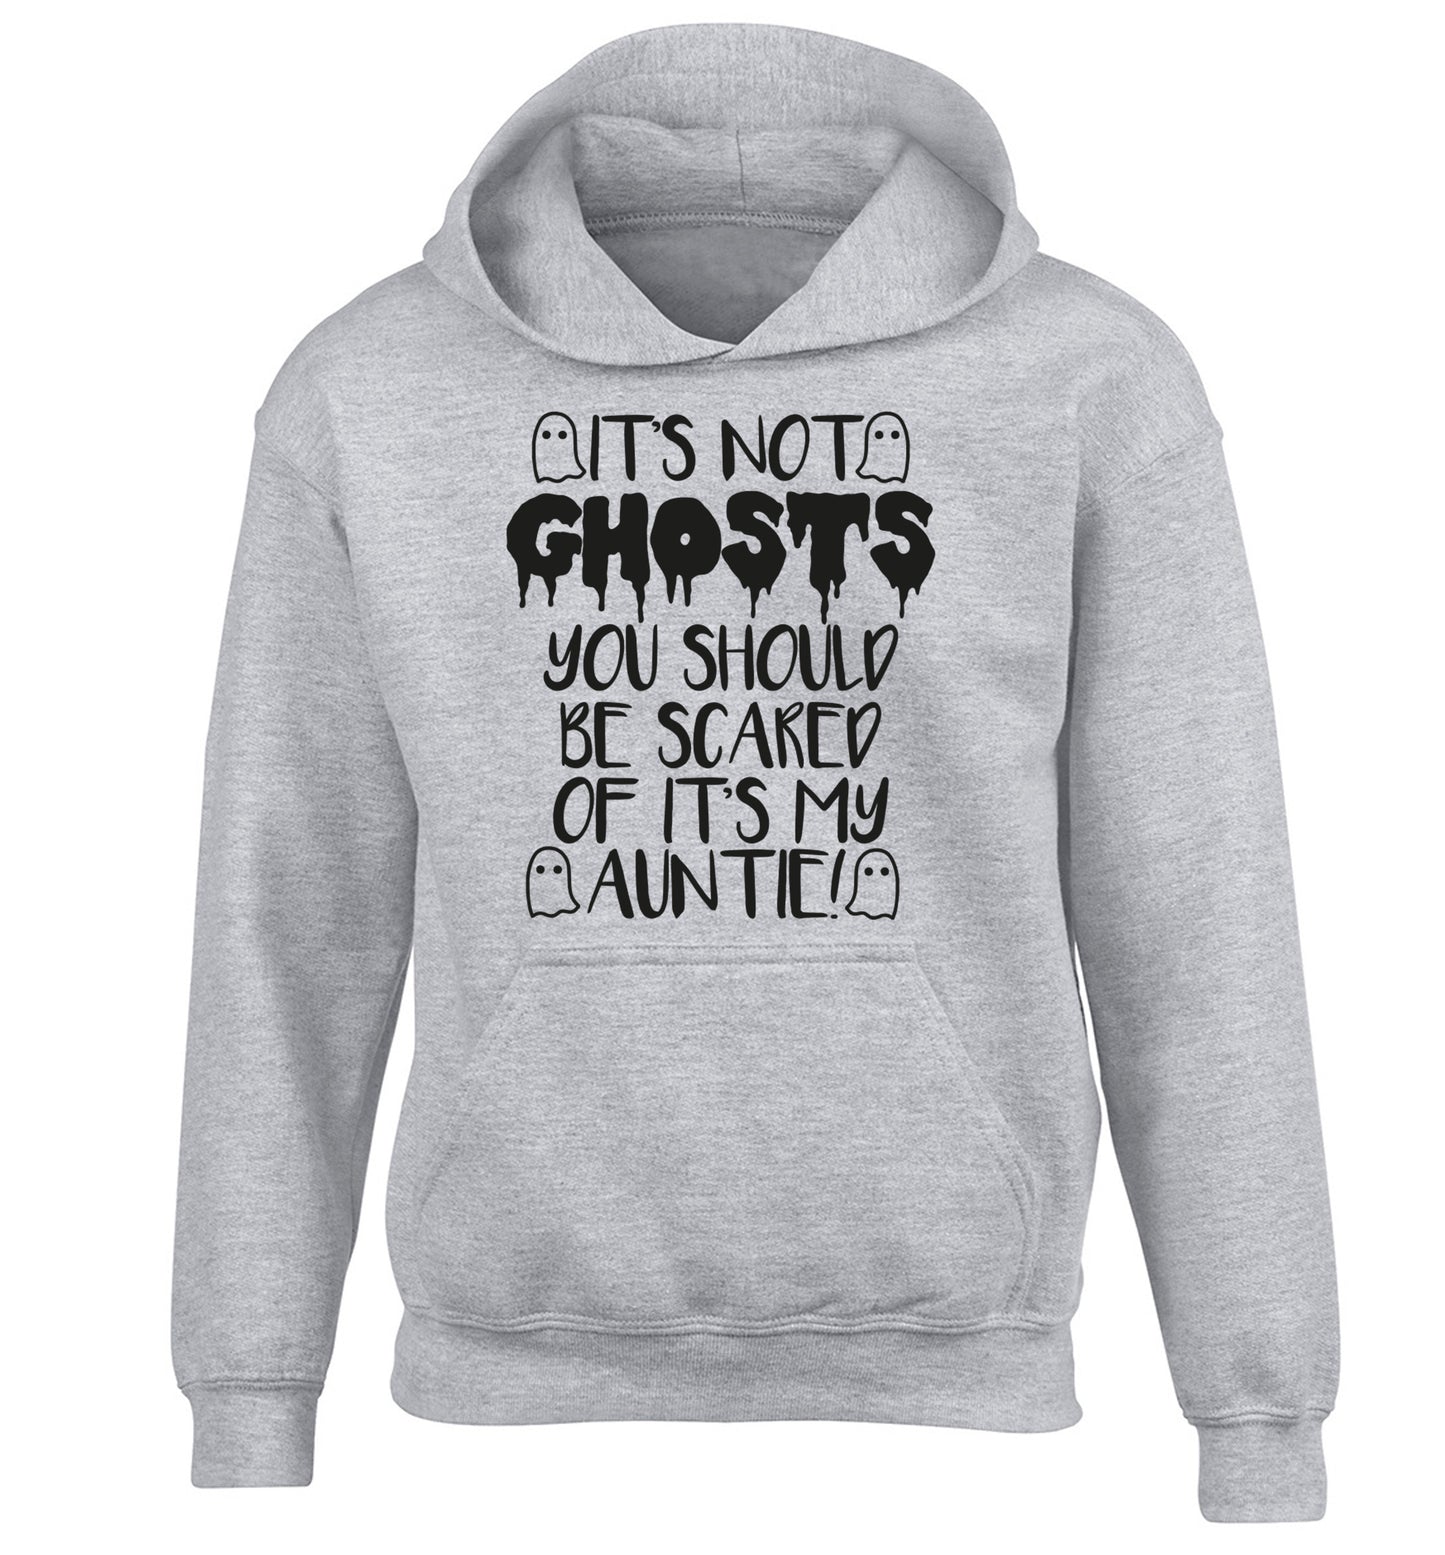 It's not ghosts you should be scared of it's my auntie! children's grey hoodie 12-14 Years